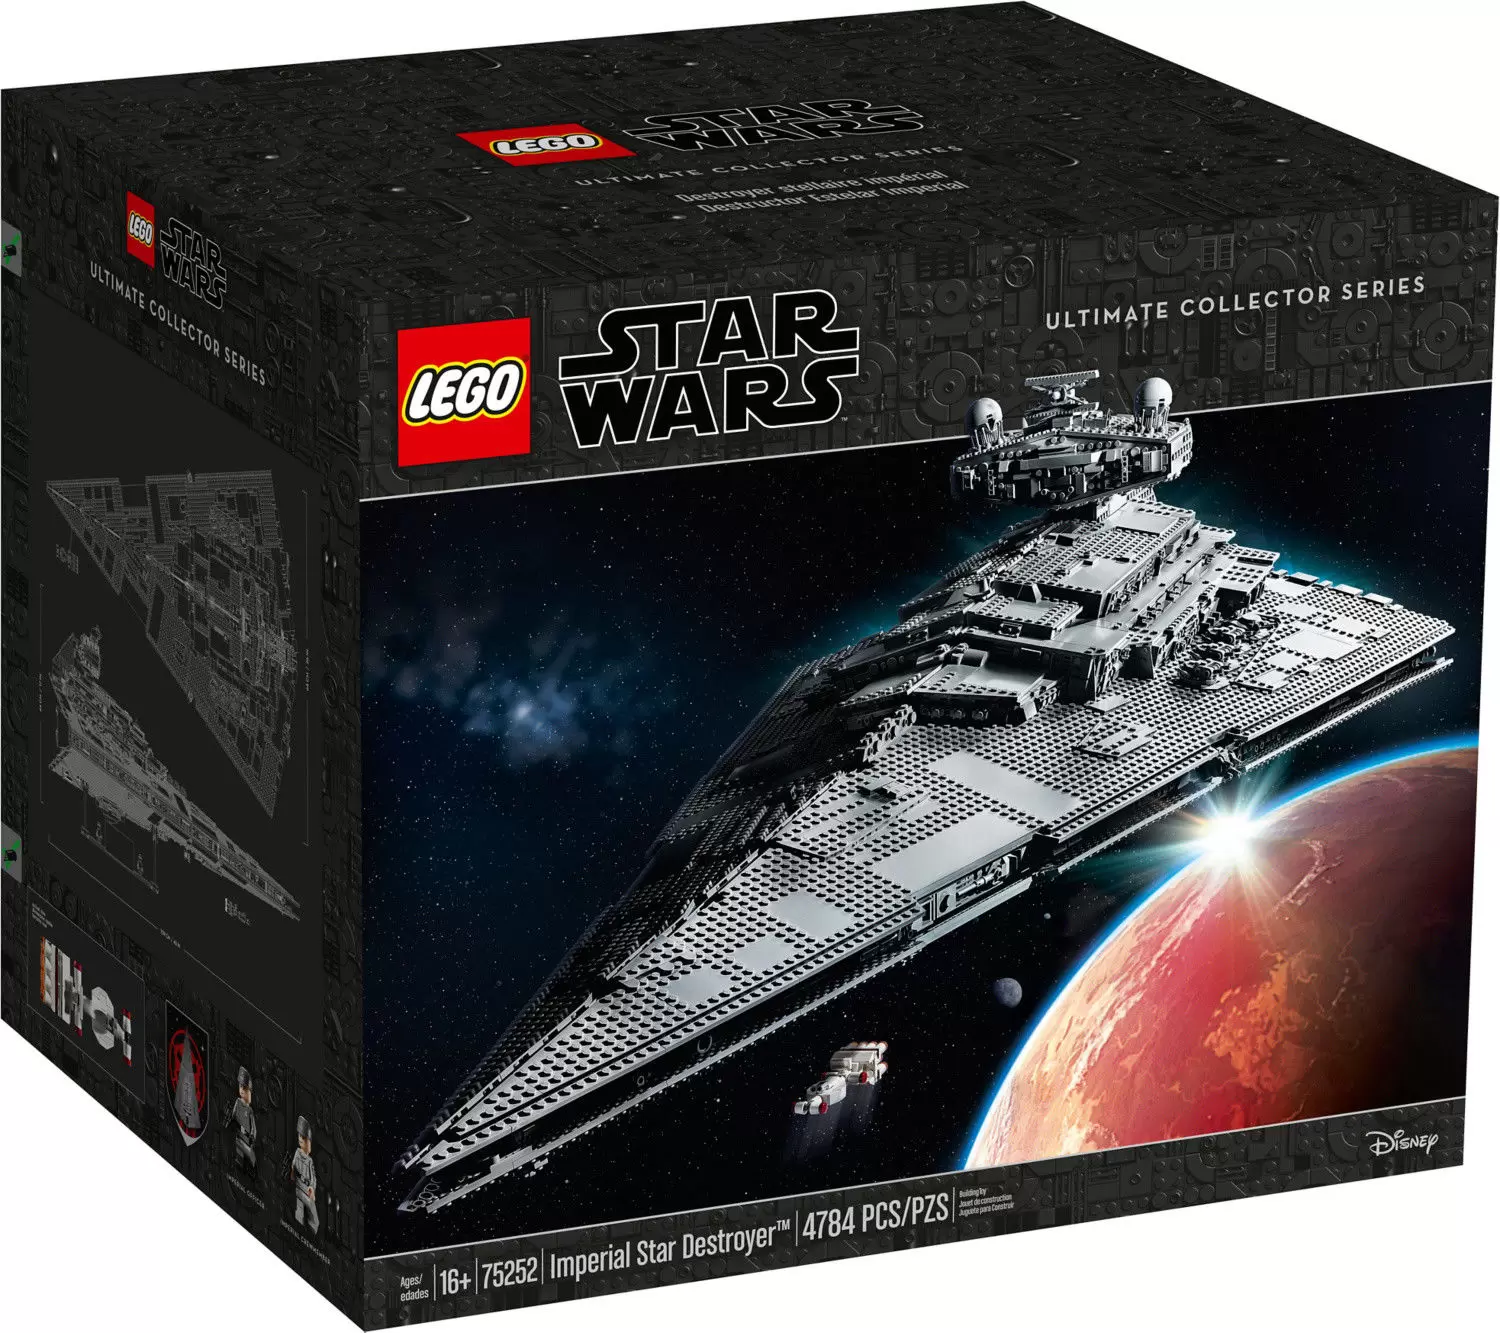 LEGO Star Wars - Imperial Star Destroyer (Ultimate Collector Series)